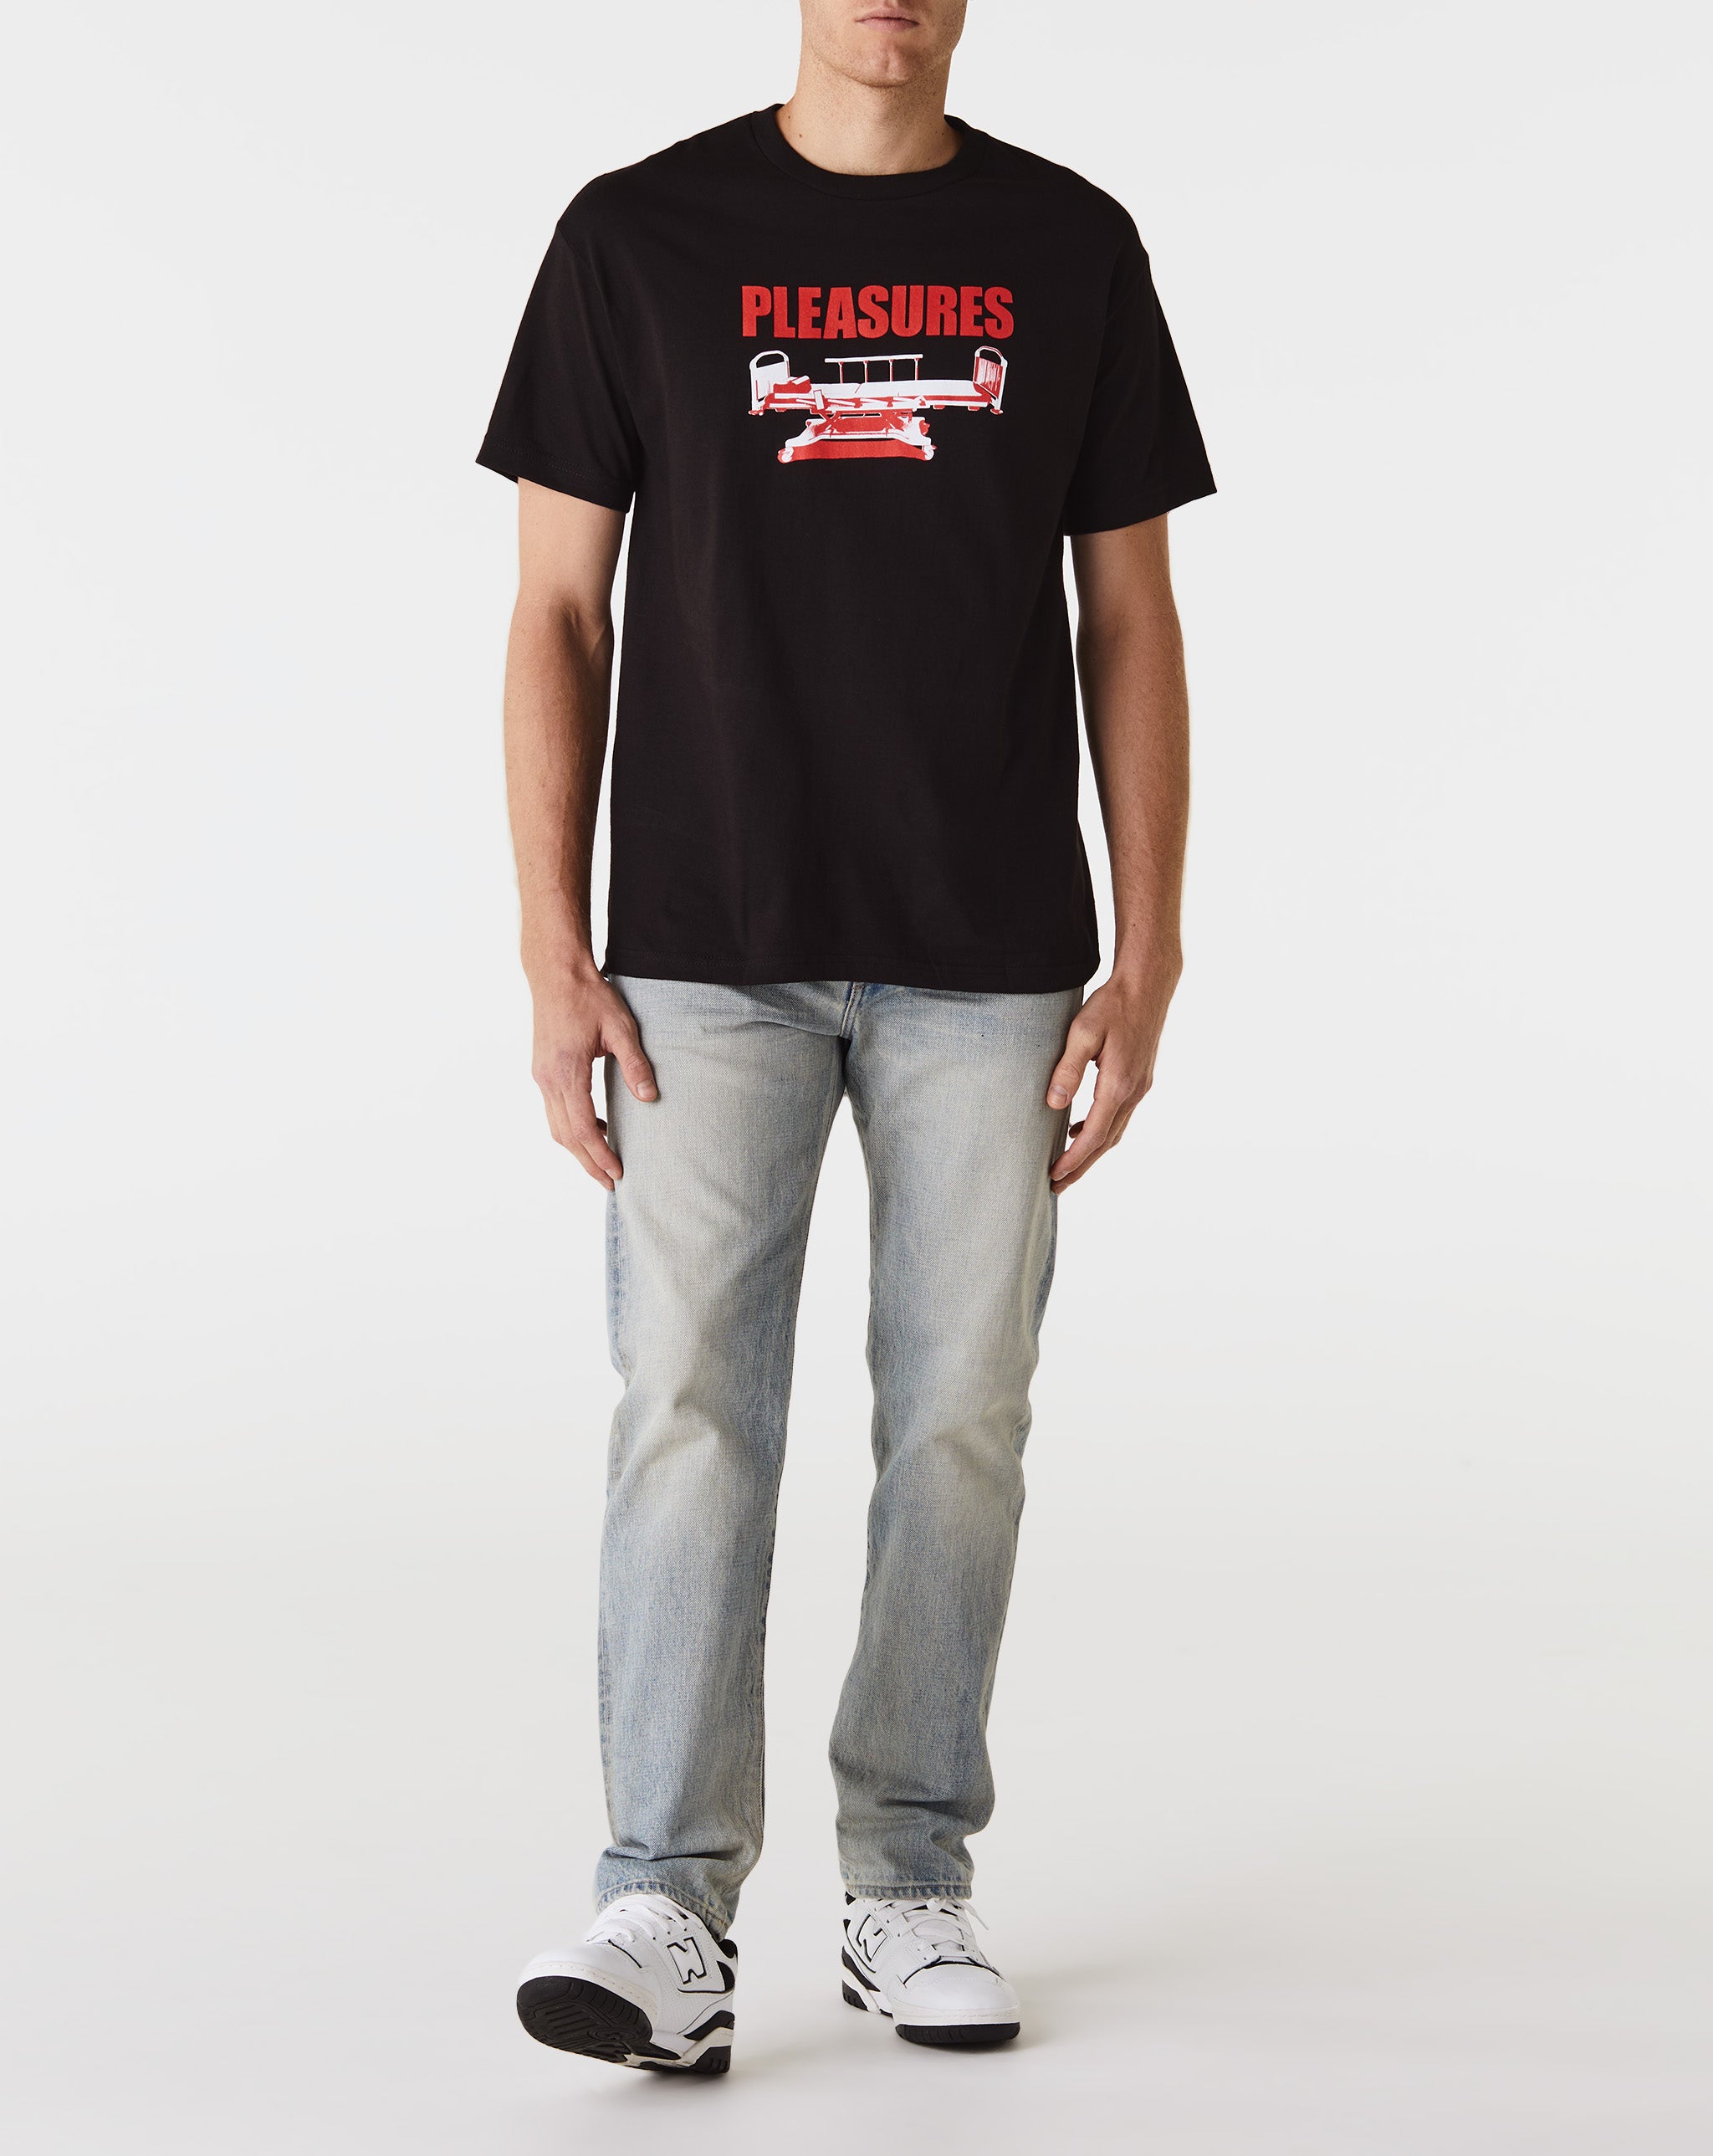 Pleasures Bed T-Shirt - Rule of Next Apparel